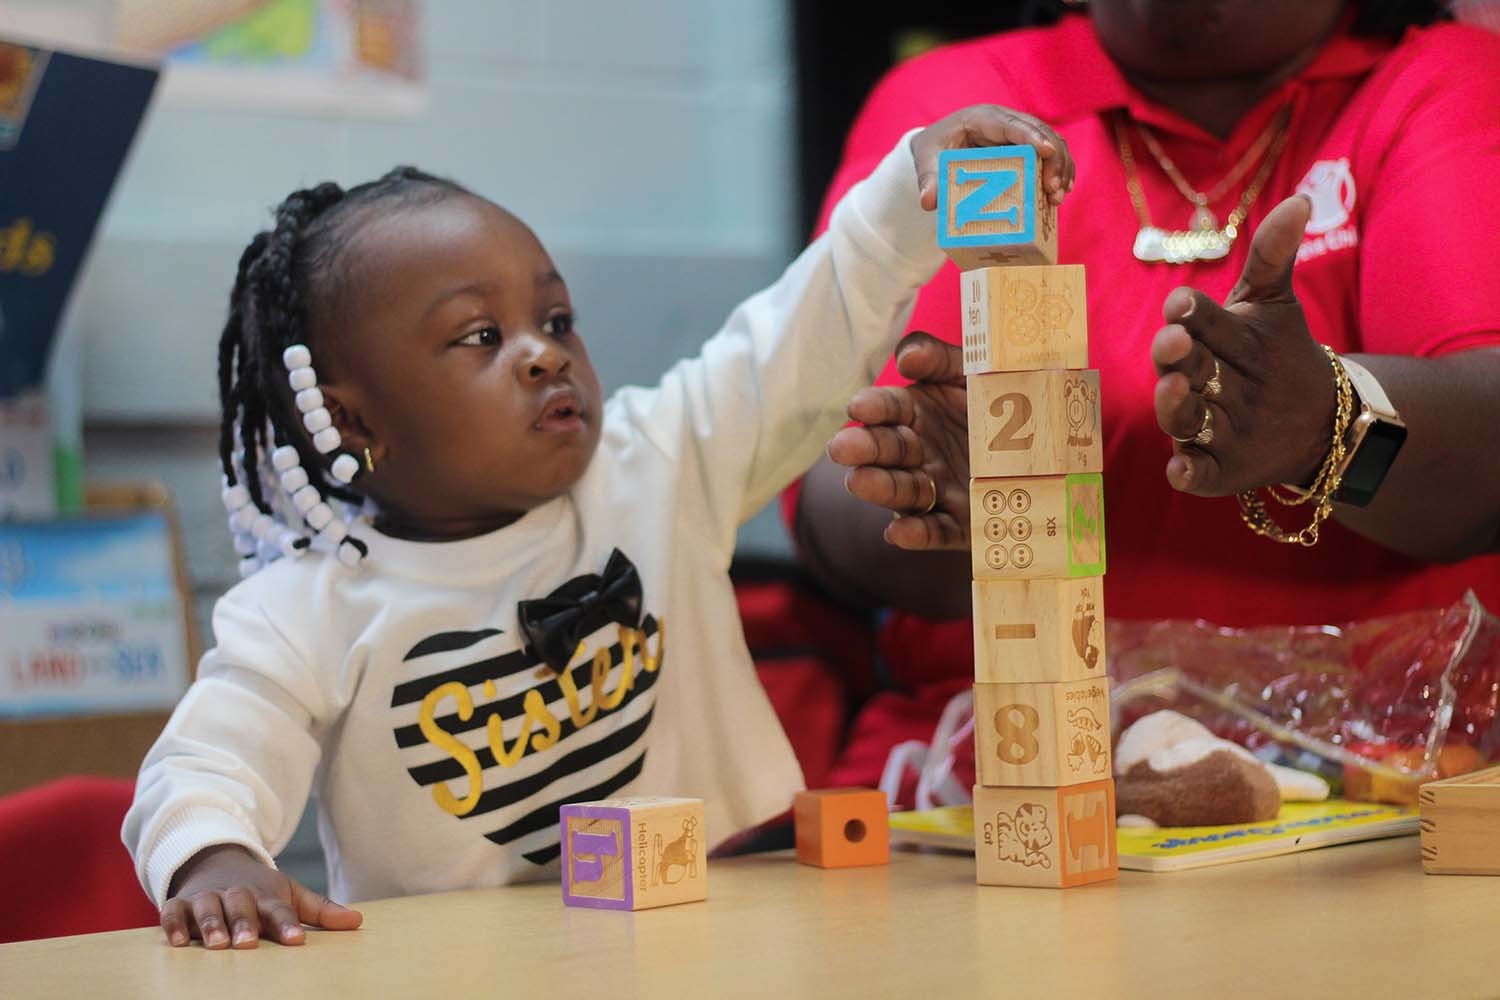 Home visits from Save the Children inspired Aubree’s mom to be her daughter’s first teacher, making the 2-year old a strong learner from the start.